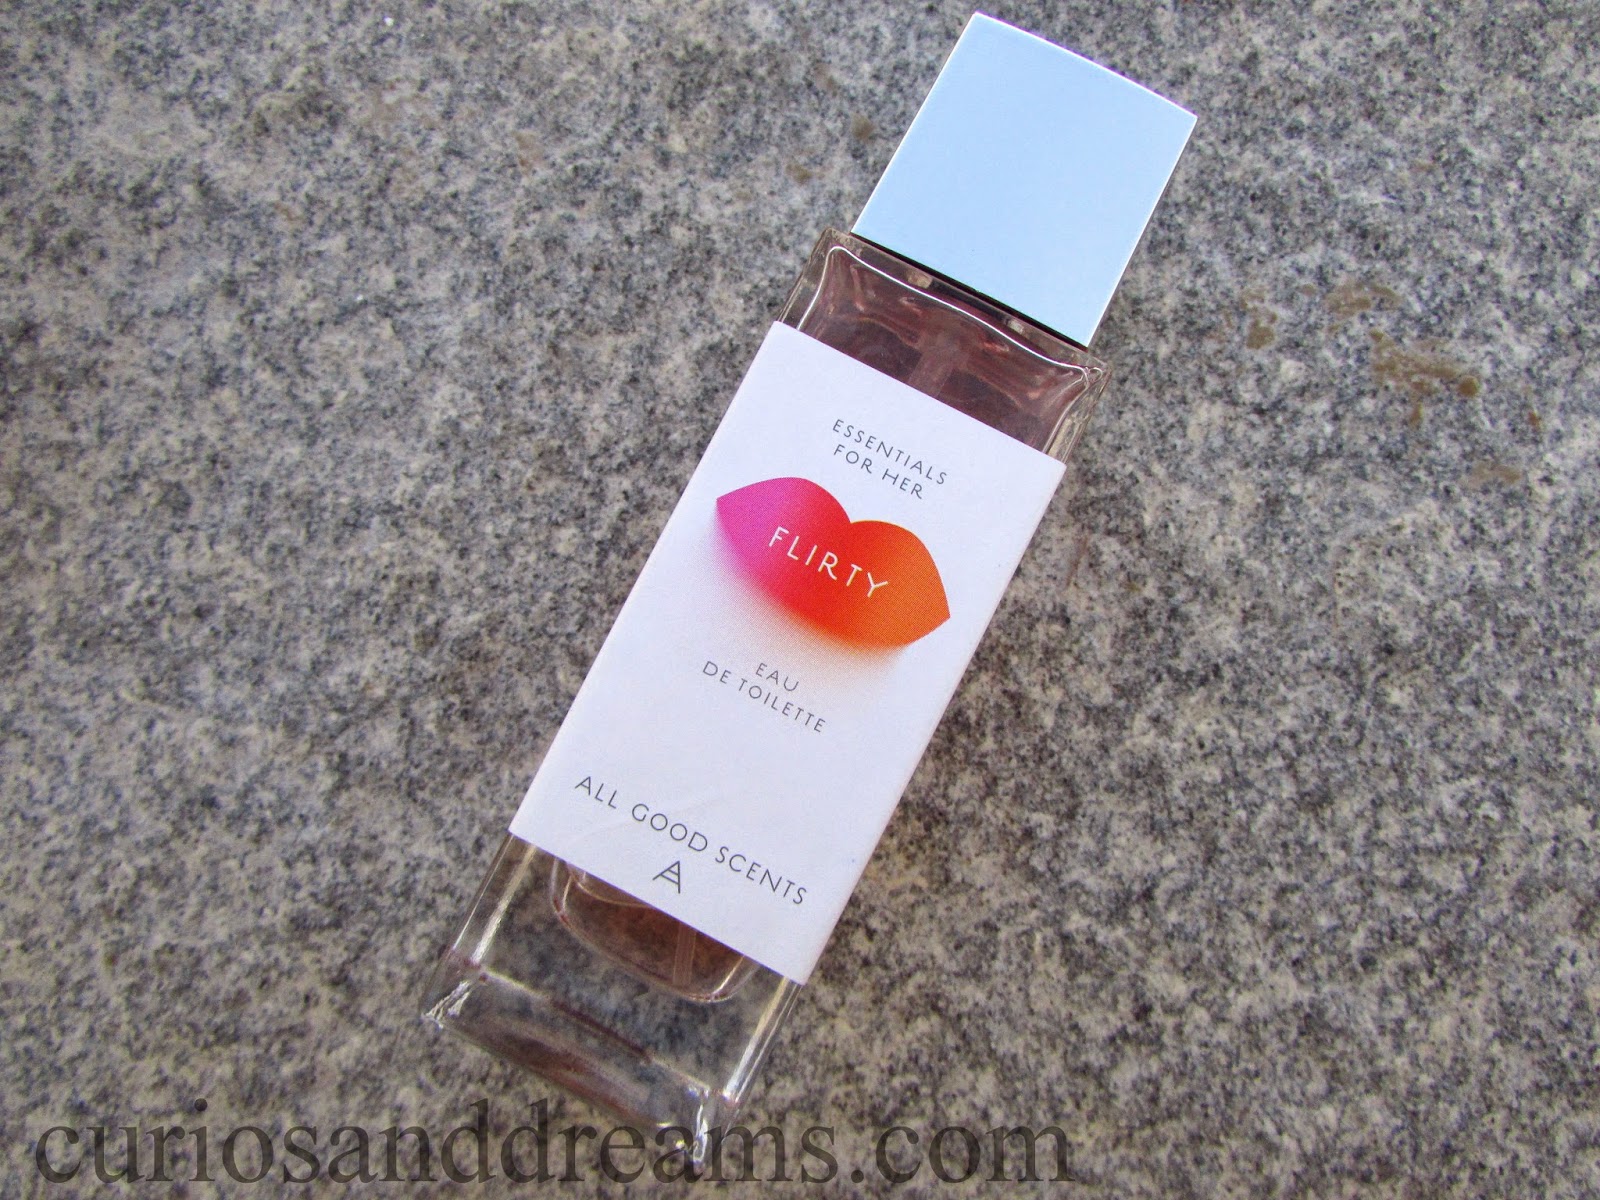 all good scents, all good scents flirty review, all good scents review